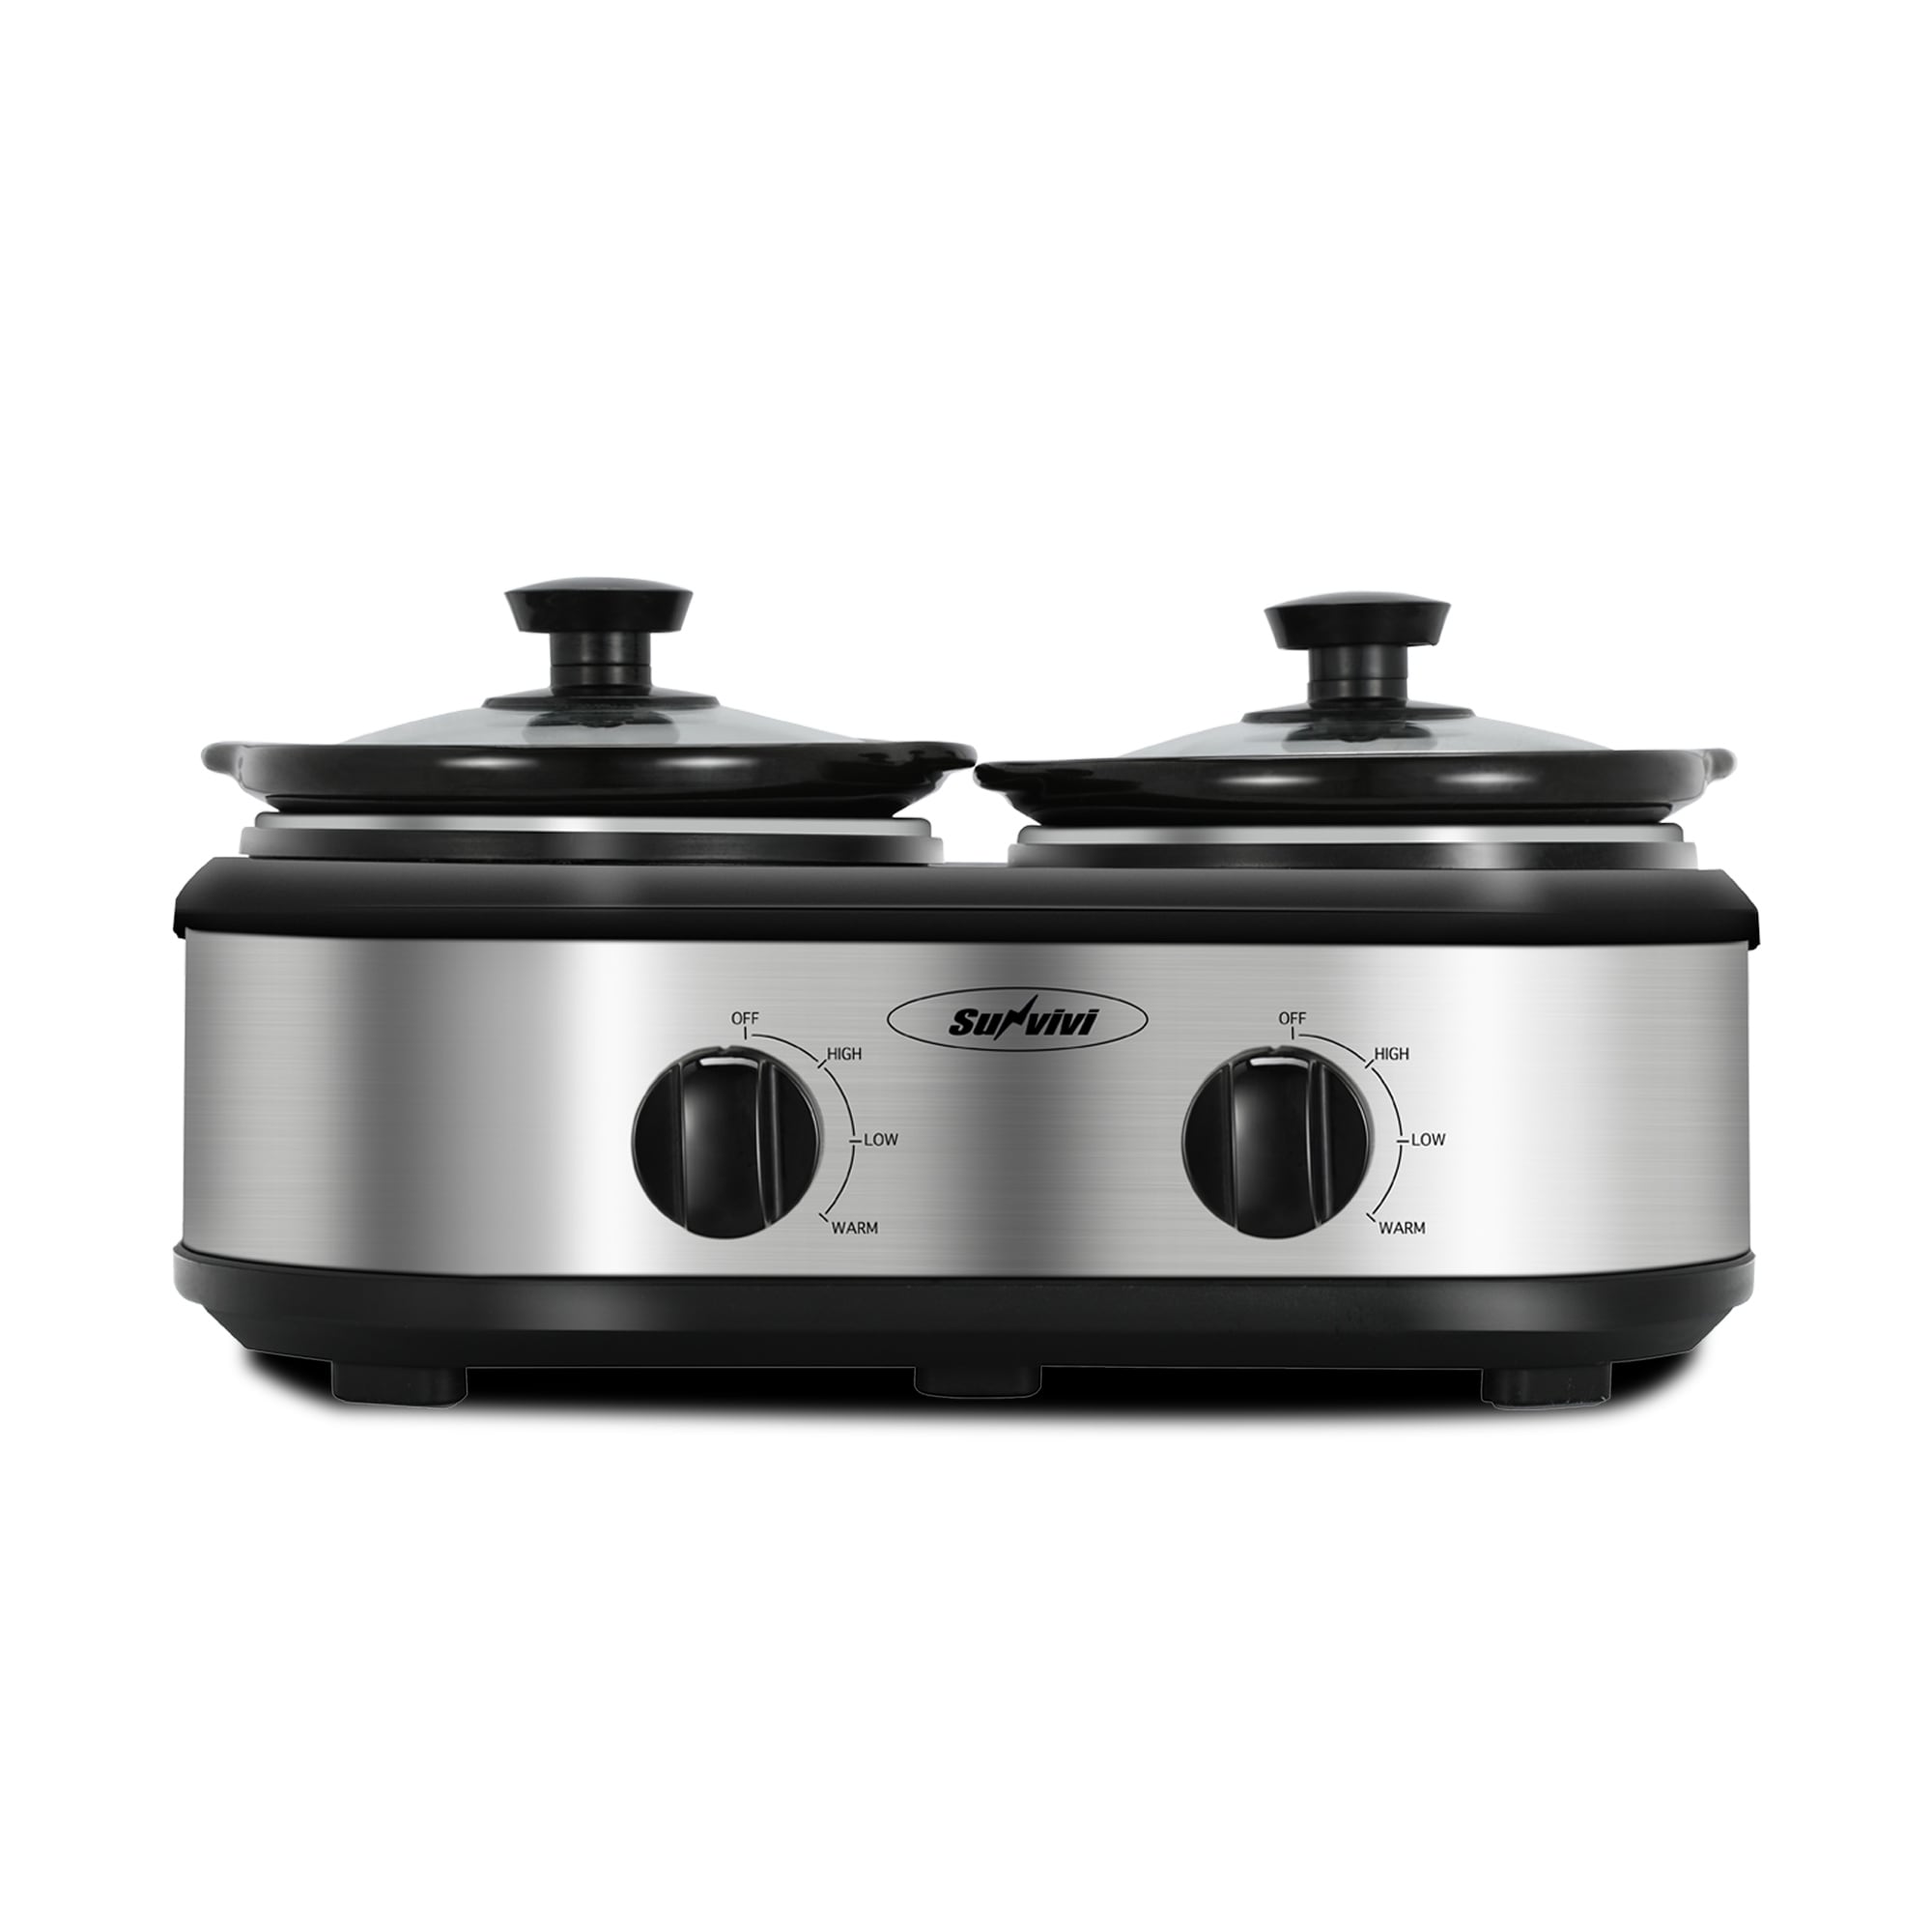 https://ak1.ostkcdn.com/images/products/is/images/direct/955394288ce6536086a4acf0f9620c1e6a90bb7e/Royalcraft-2-Pot-Slow-Cooker-Stainless-Steel-Buffet-Server-1.25-Quart.jpg